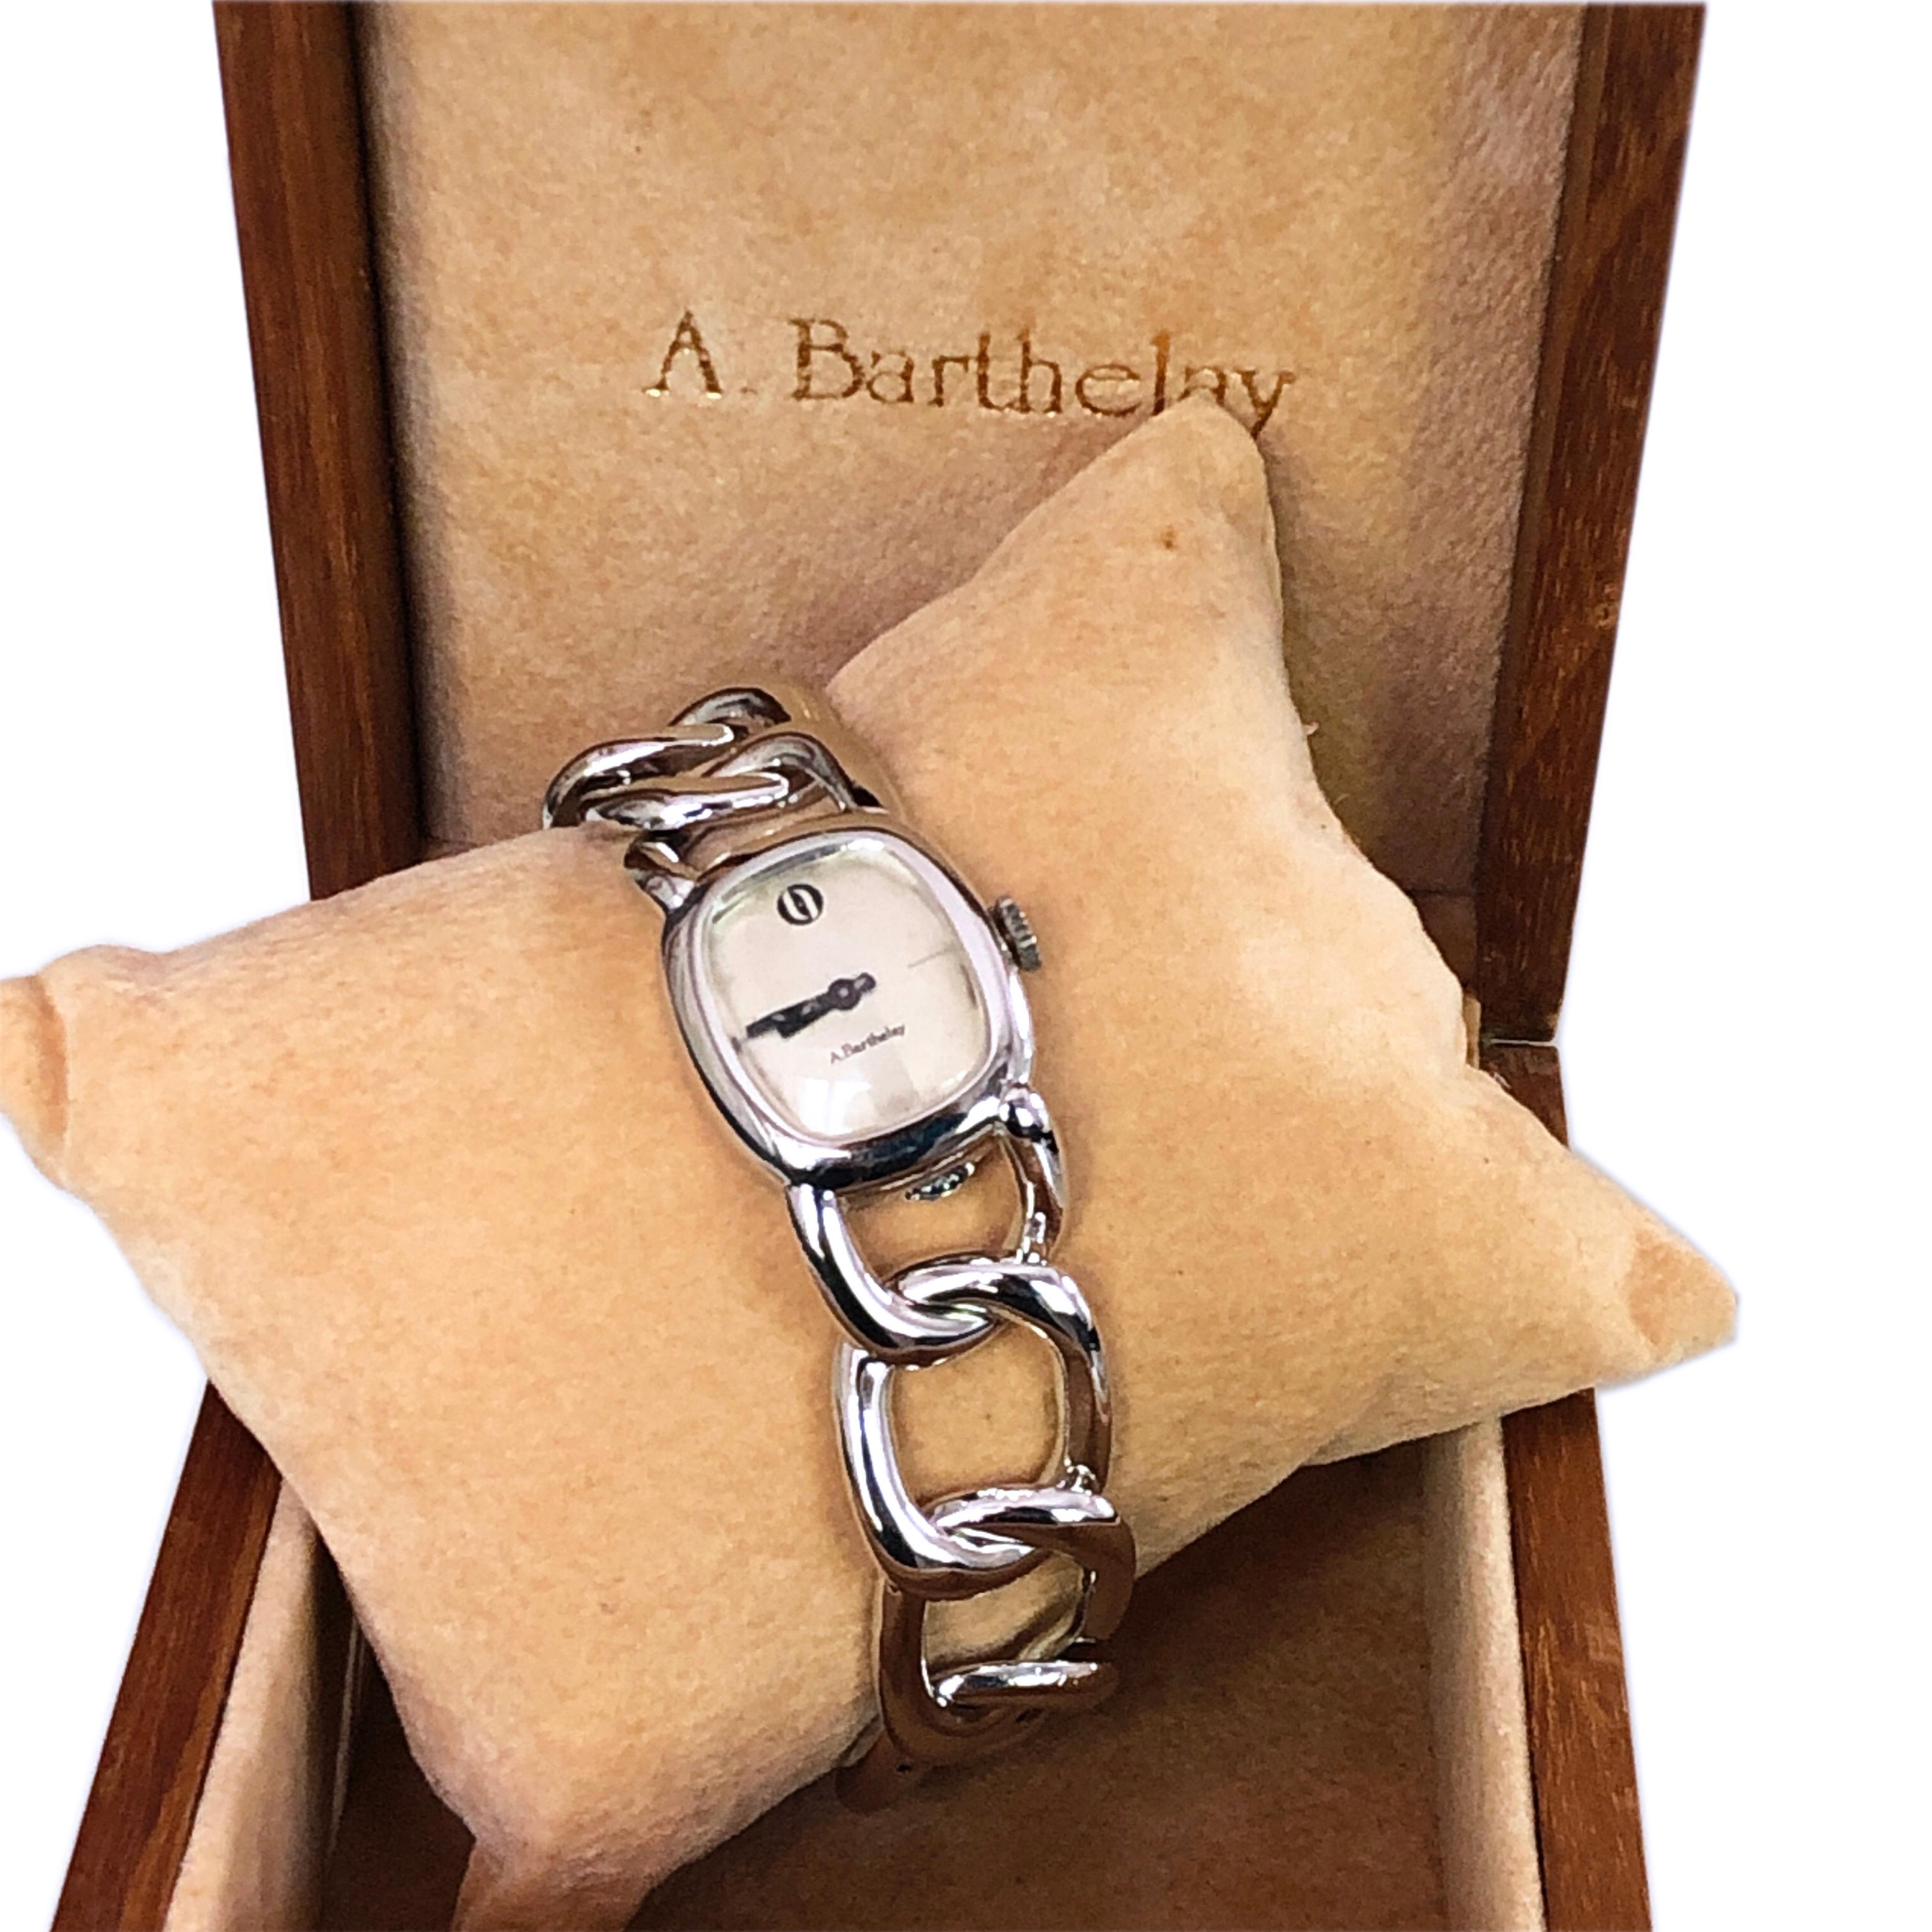 Original 1970s Alexis Barthelay Manual-Winding Movement Chain Silver Watch For Sale 5